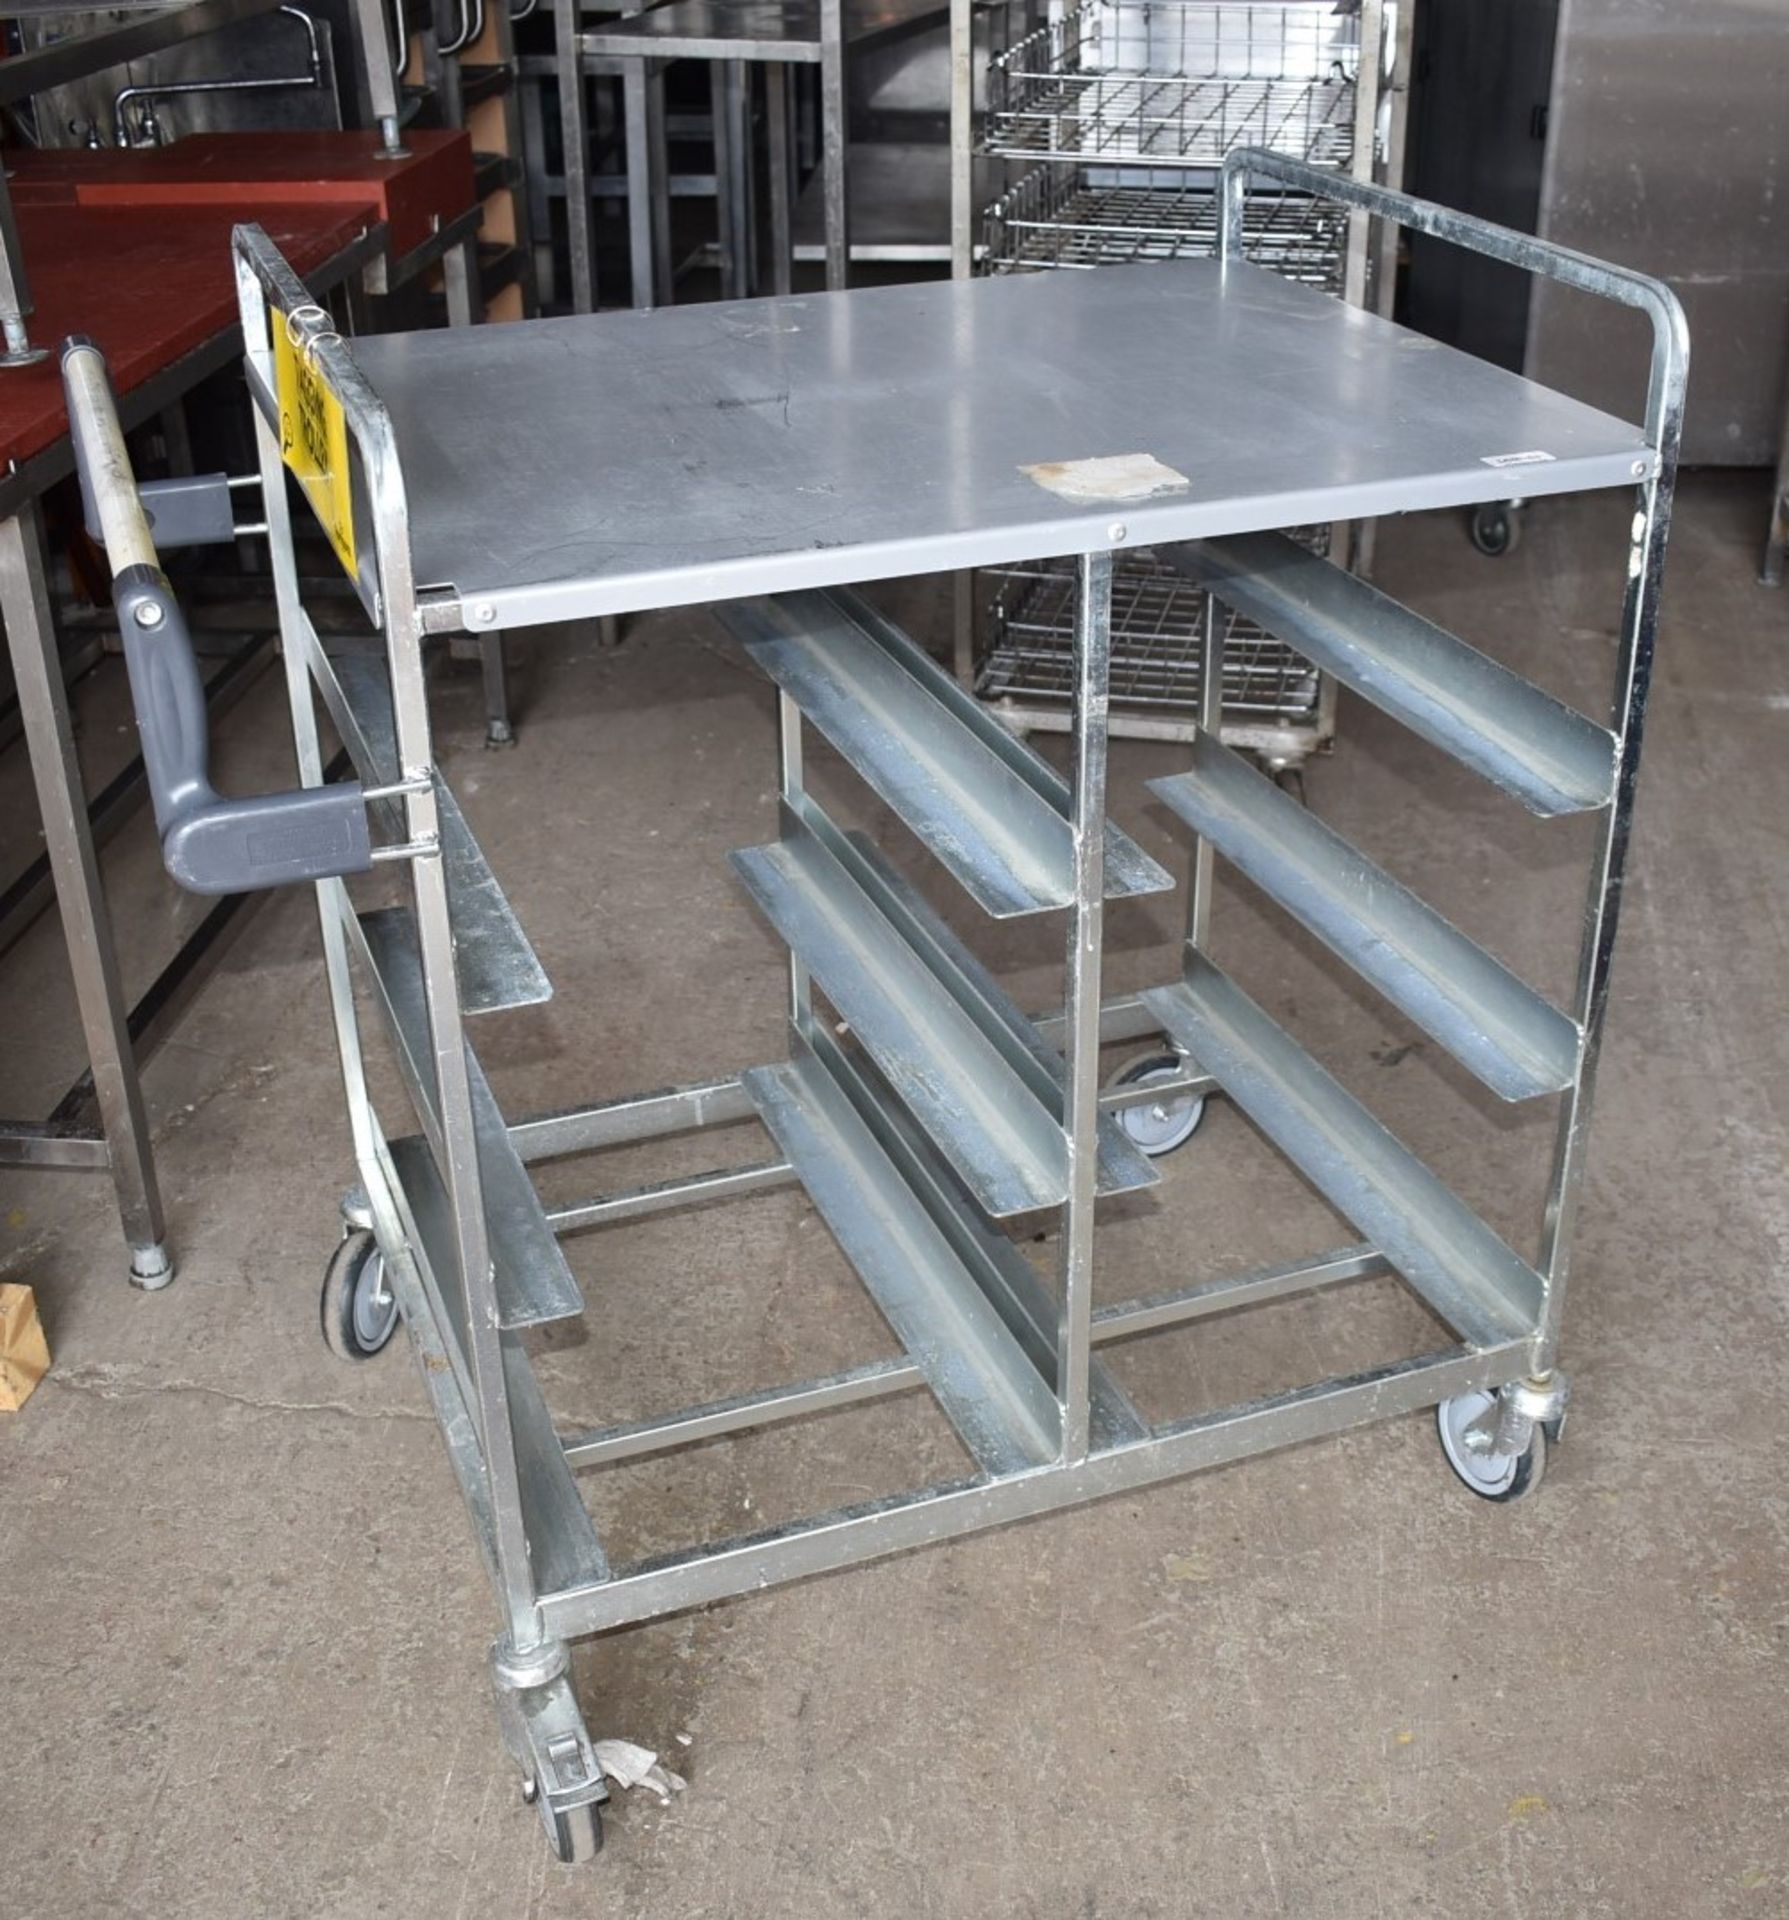 1 x Pickers Warehouse Trolley - Dimensions: H93 x W102 x D67 cms - Recently Removed From Major